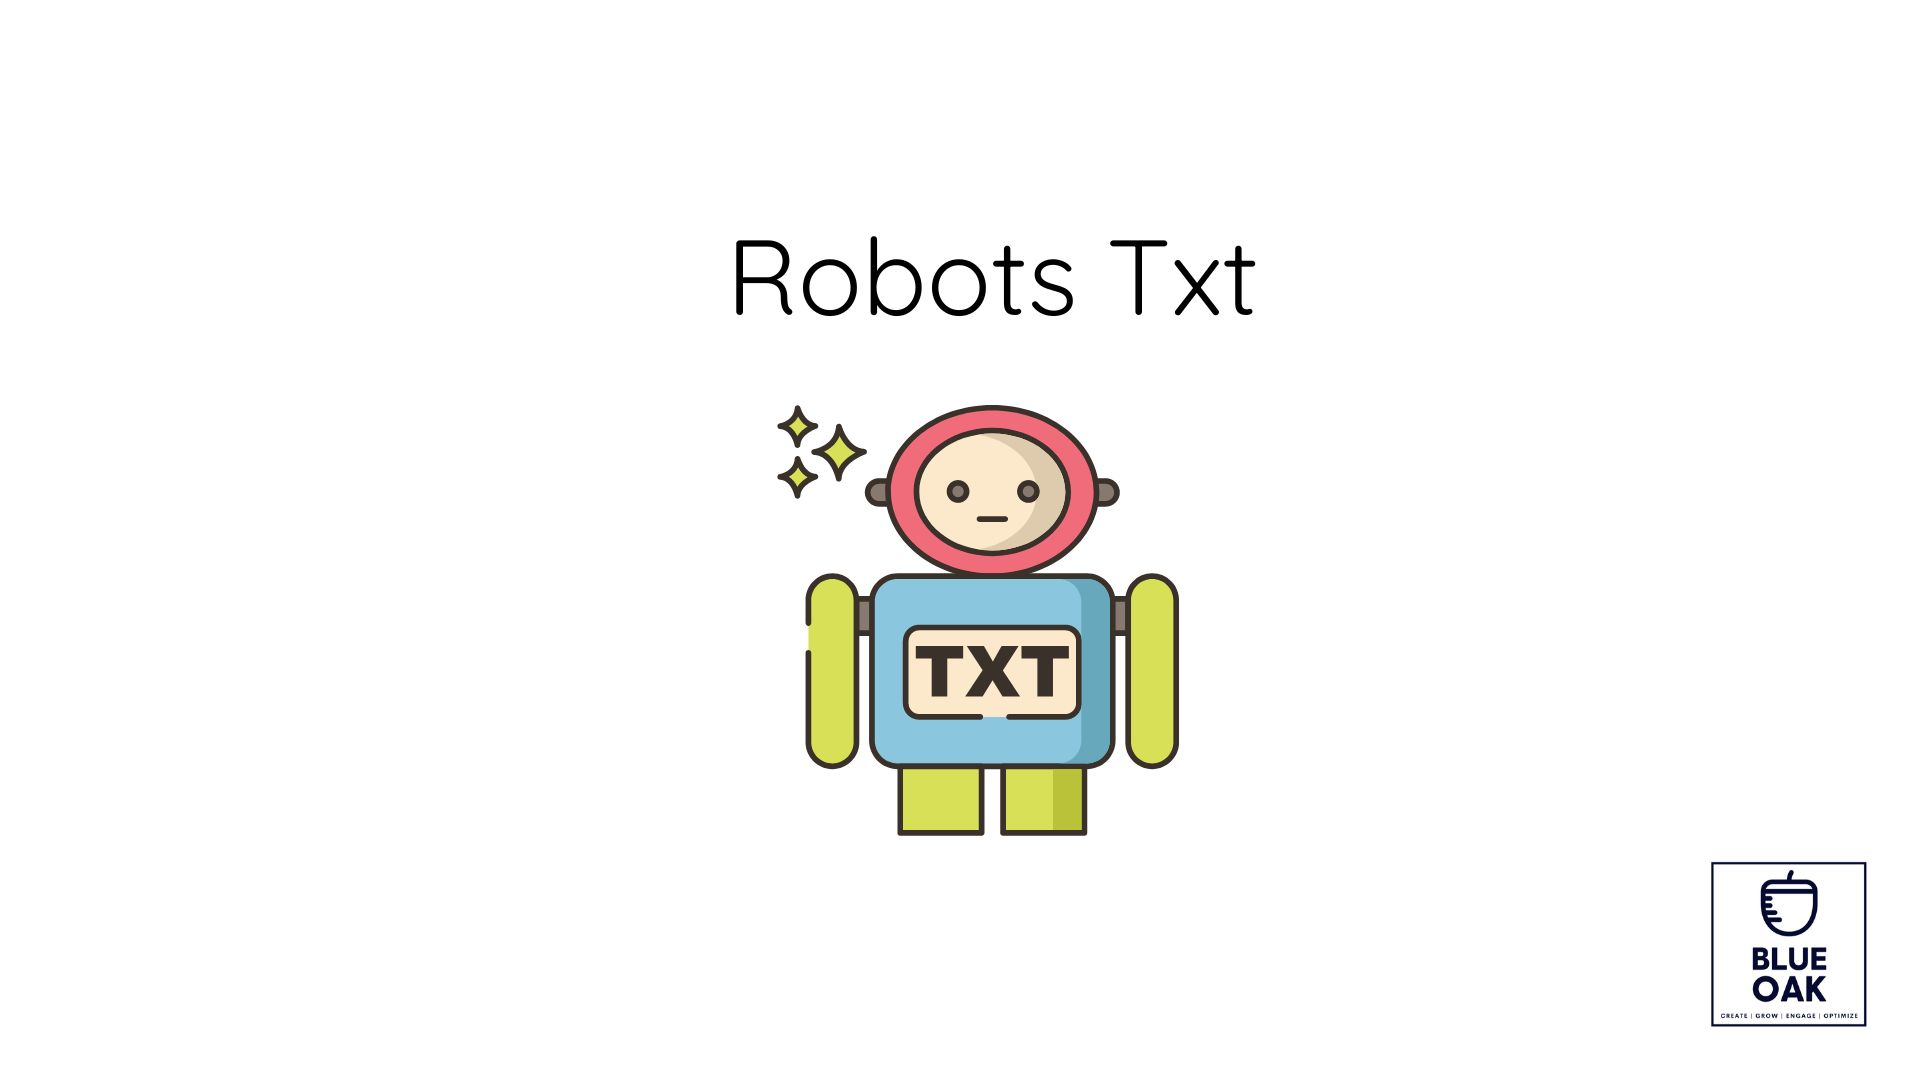 What Is Robots txt